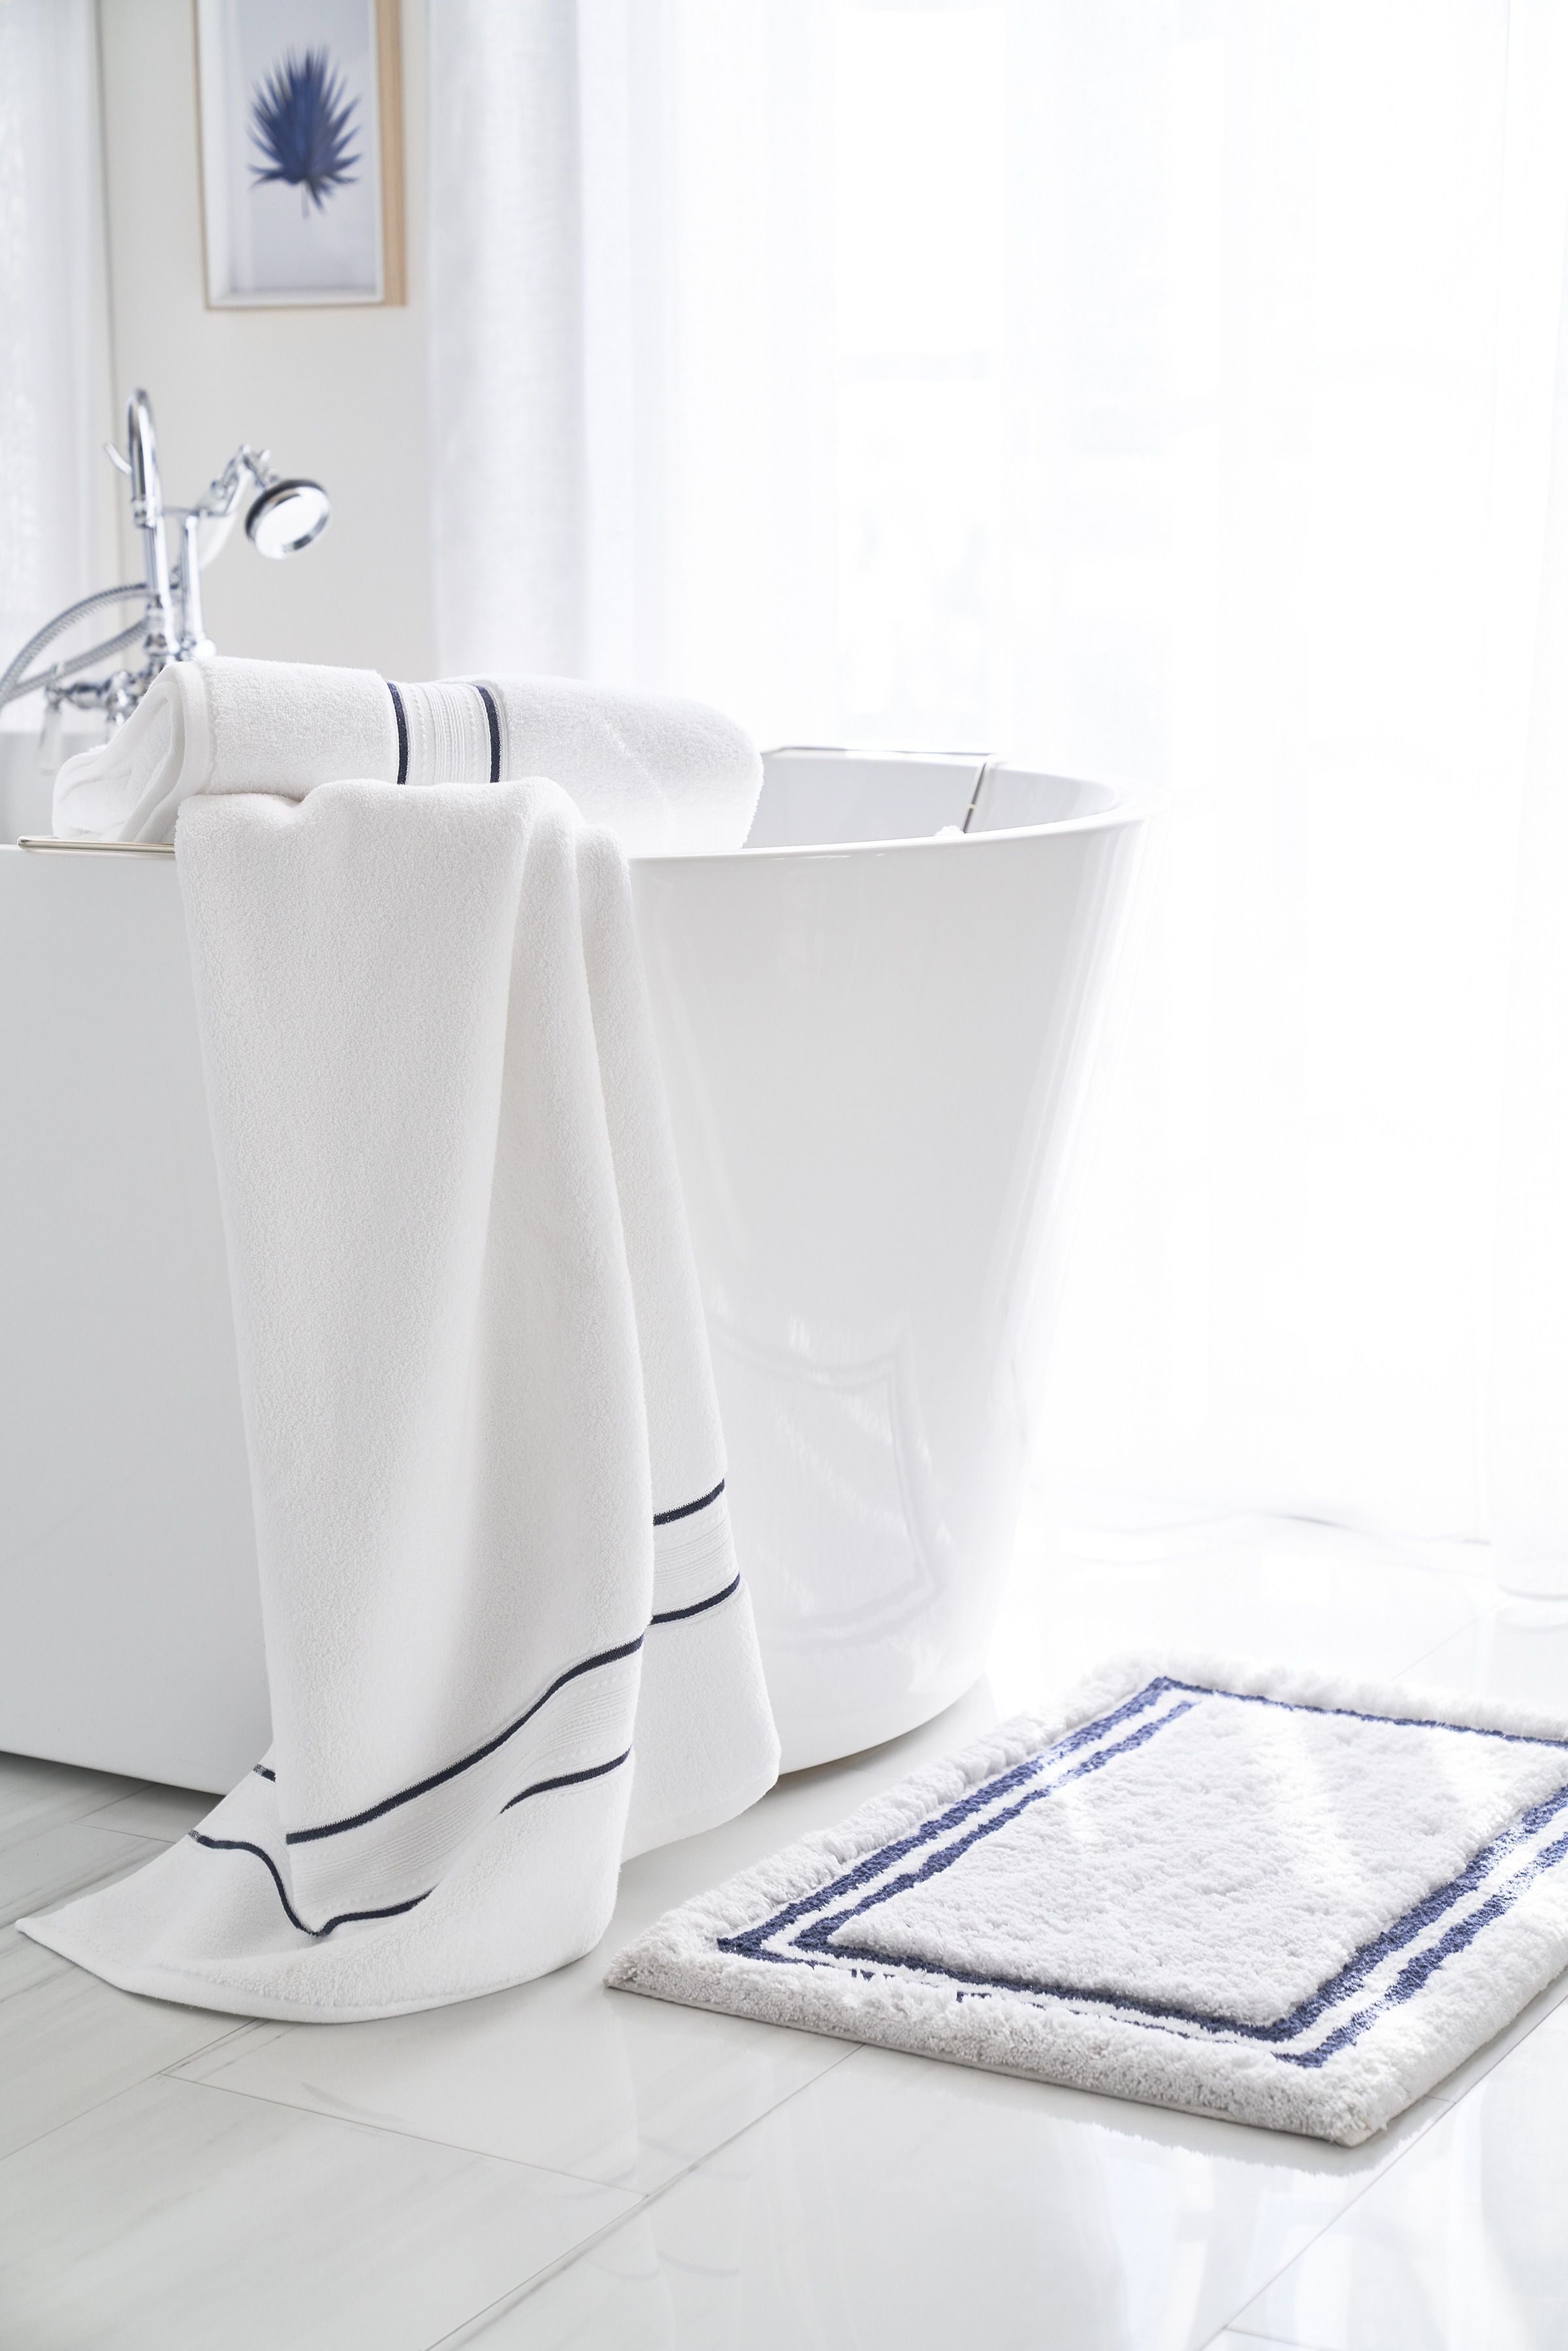 Liz Claiborne Luxury Bath Linens: Worthy of Kings and Queens - Style by  JCPenney